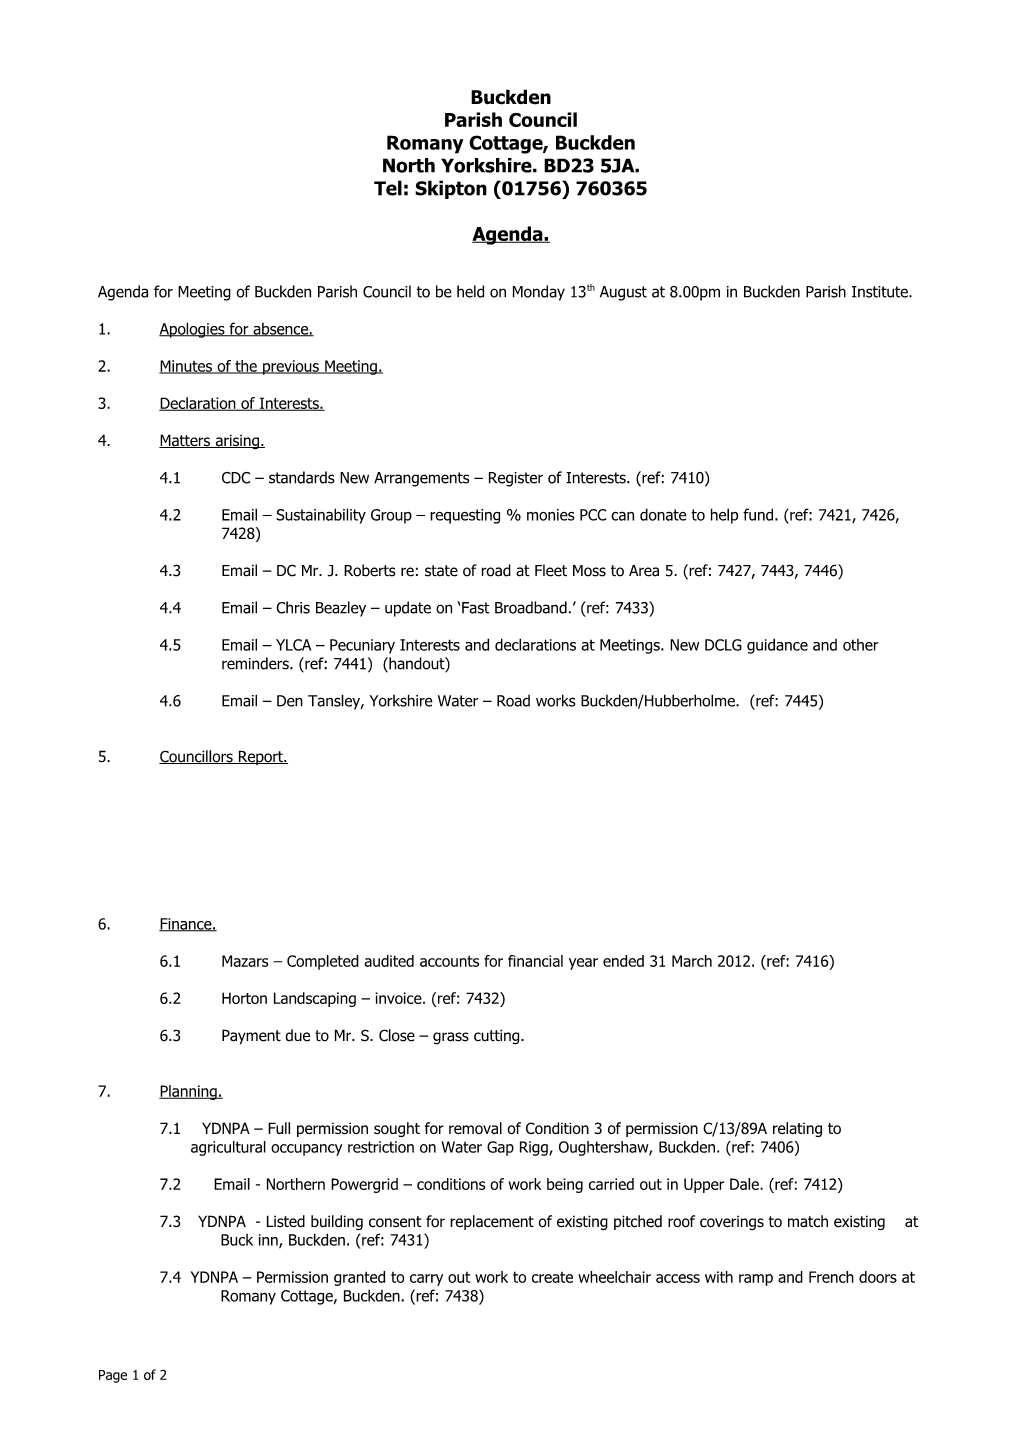 Agenda for Meeting of Buckden Parish Council to Be Held on Monday 11Th September at 8 s1